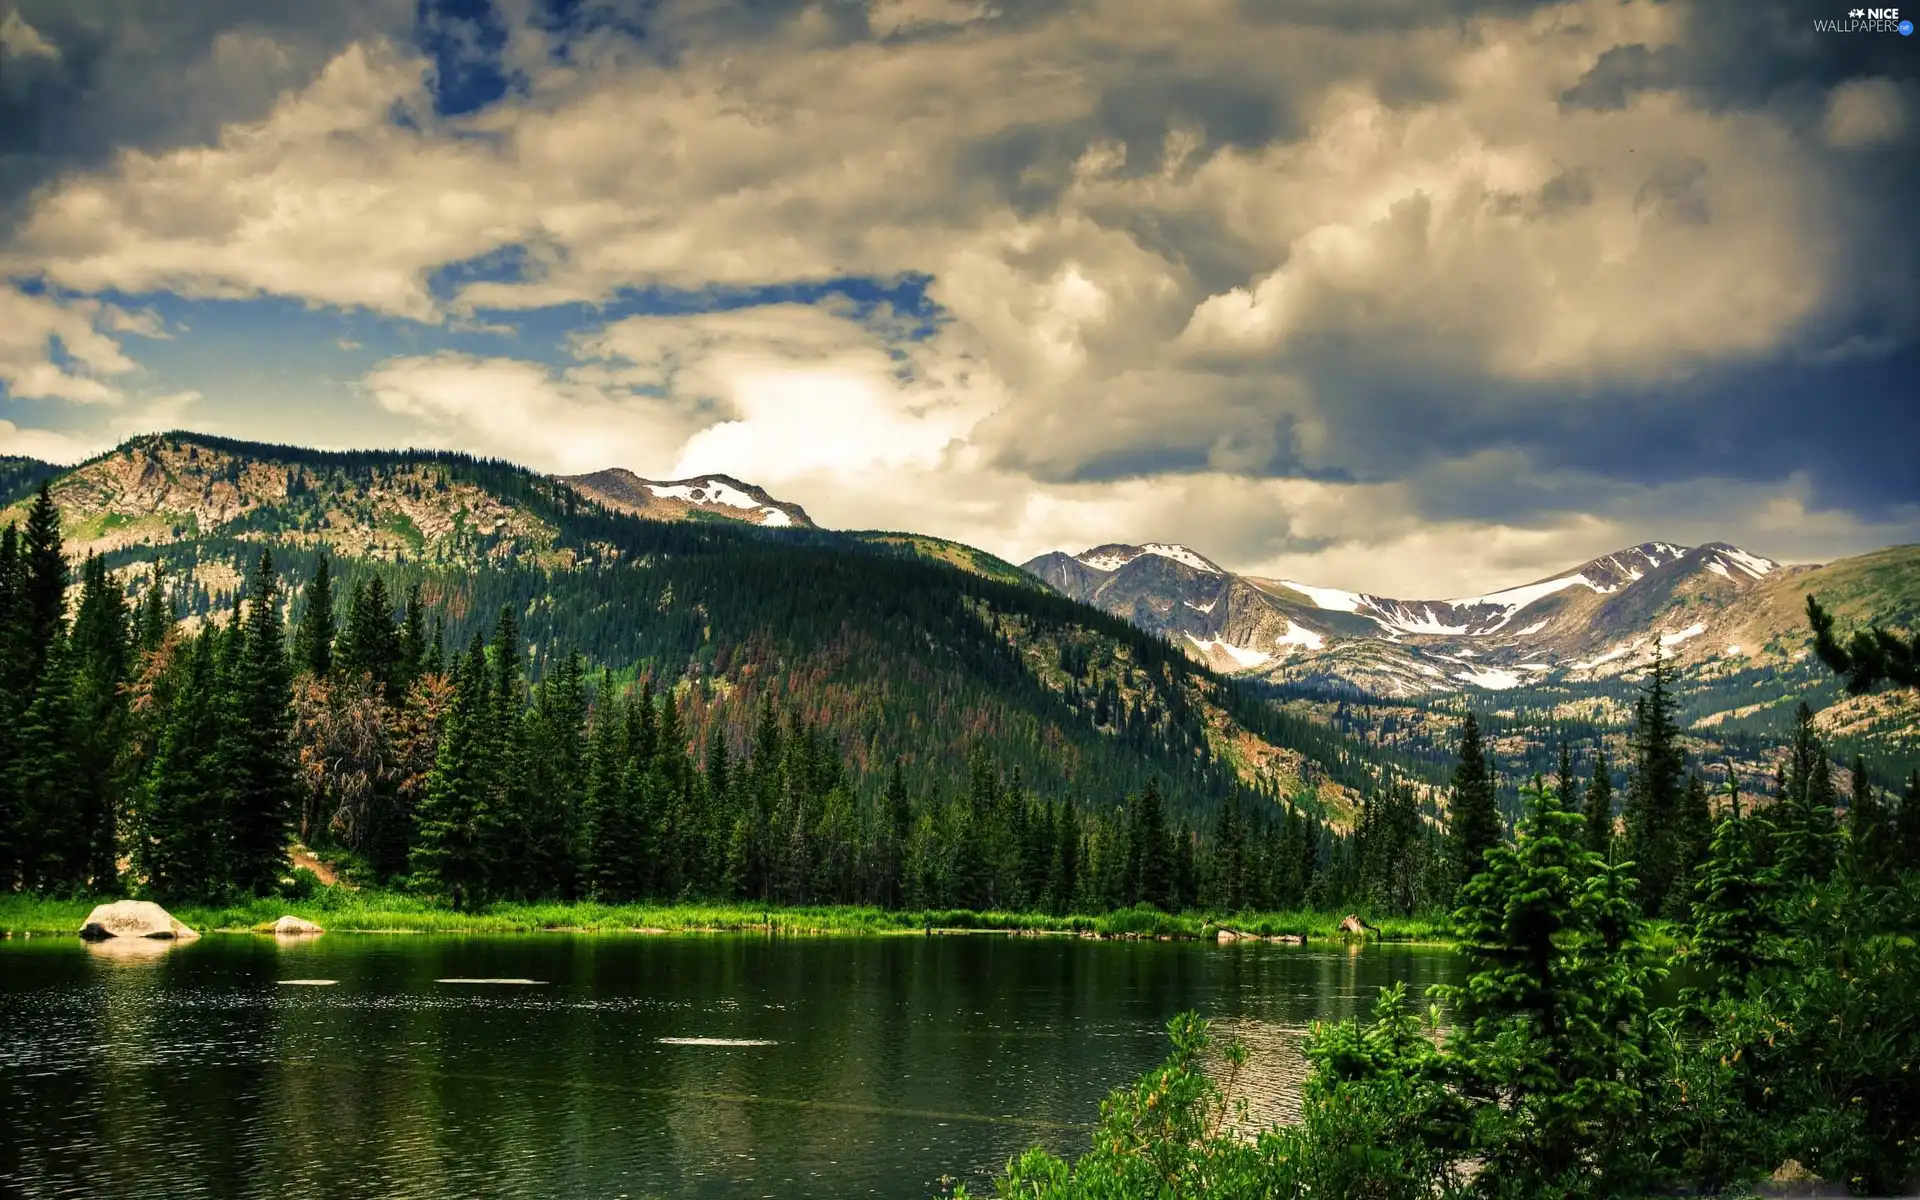 Mountains, Spruces, clouds, lake